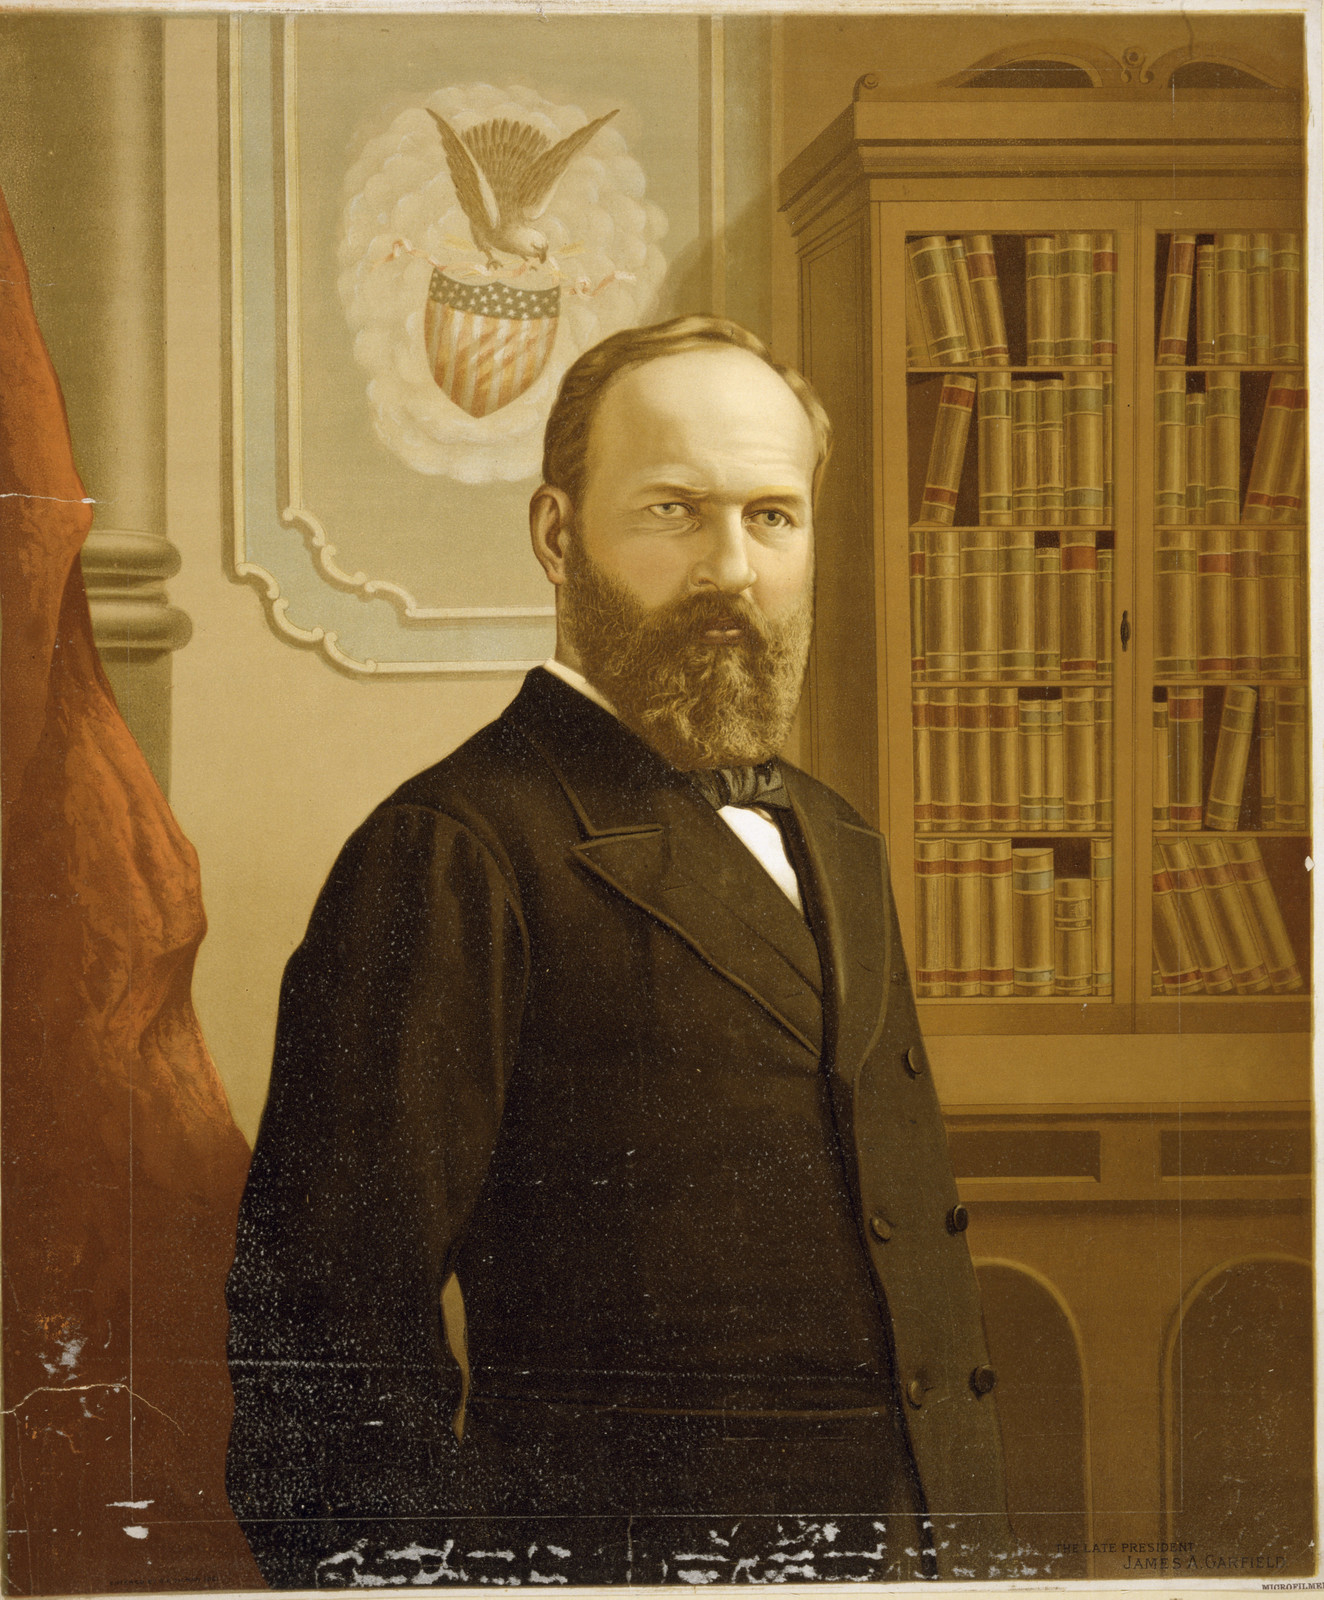 No Known Restrictions: President James A. Garfield Lithograph by G.F. Gilman, ca. 1881 (LOC)